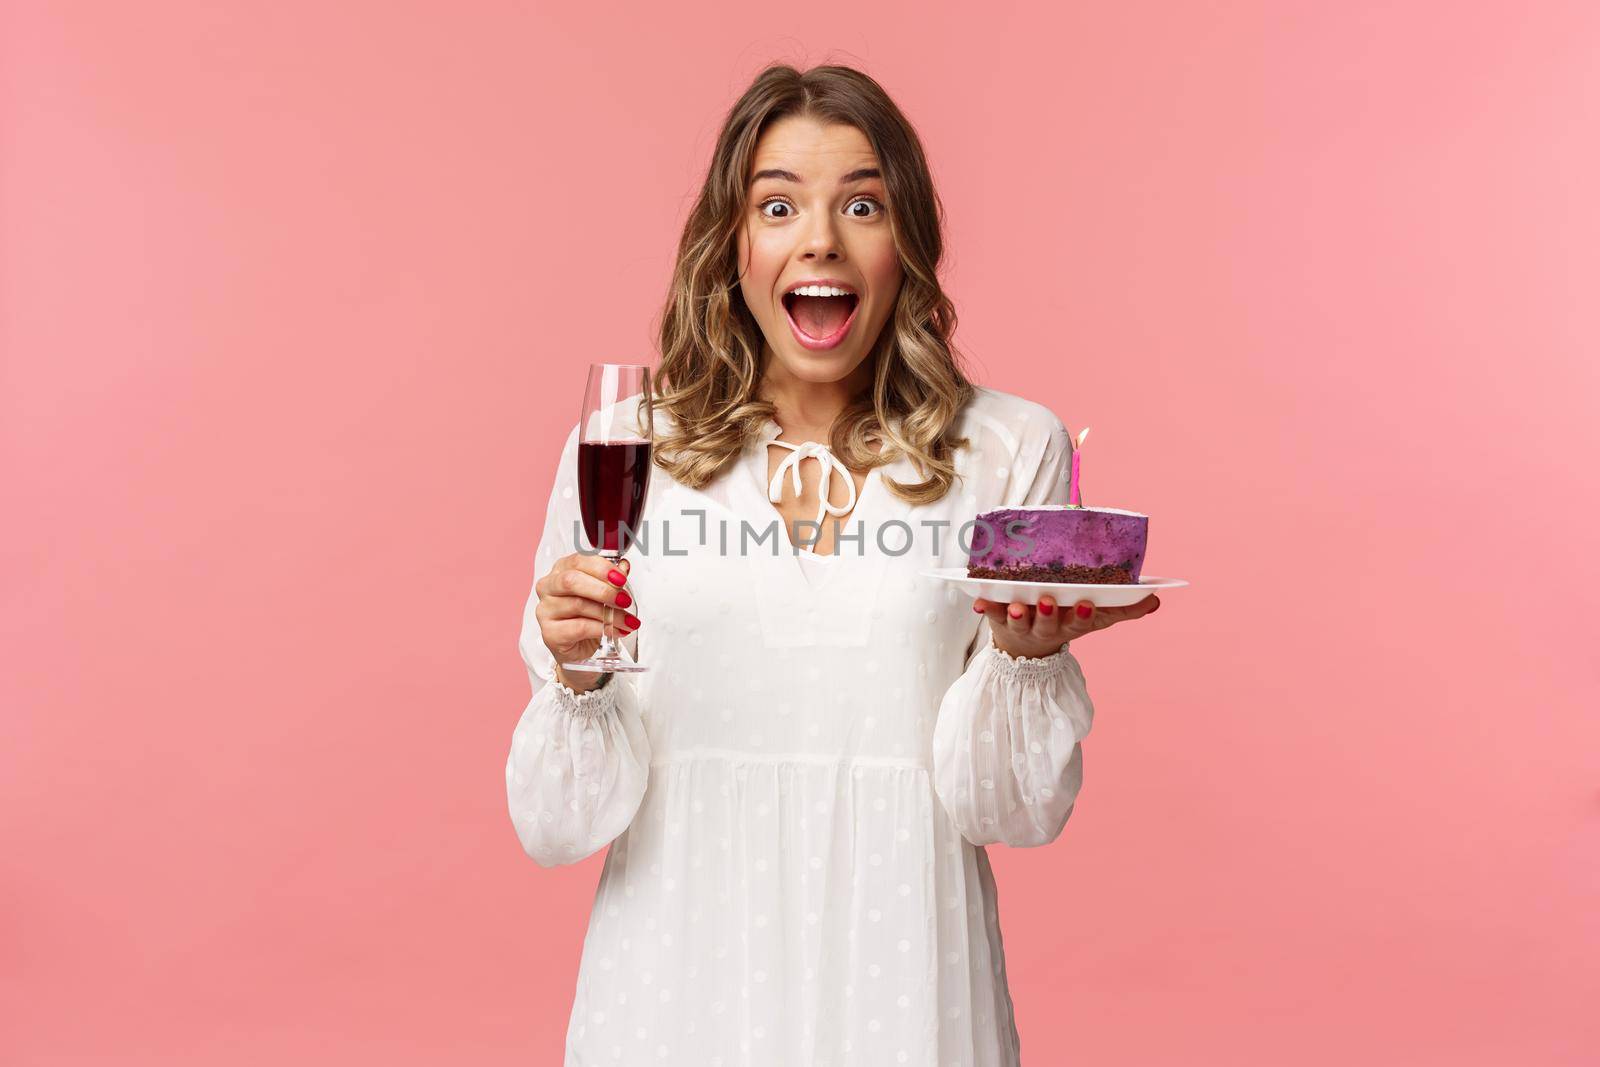 Holidays, spring and party concept. Portrait of fascinated and amused blond girl in white dress look astonished camera, celebrating birthday with b-day cake and glass of wine, pink background.